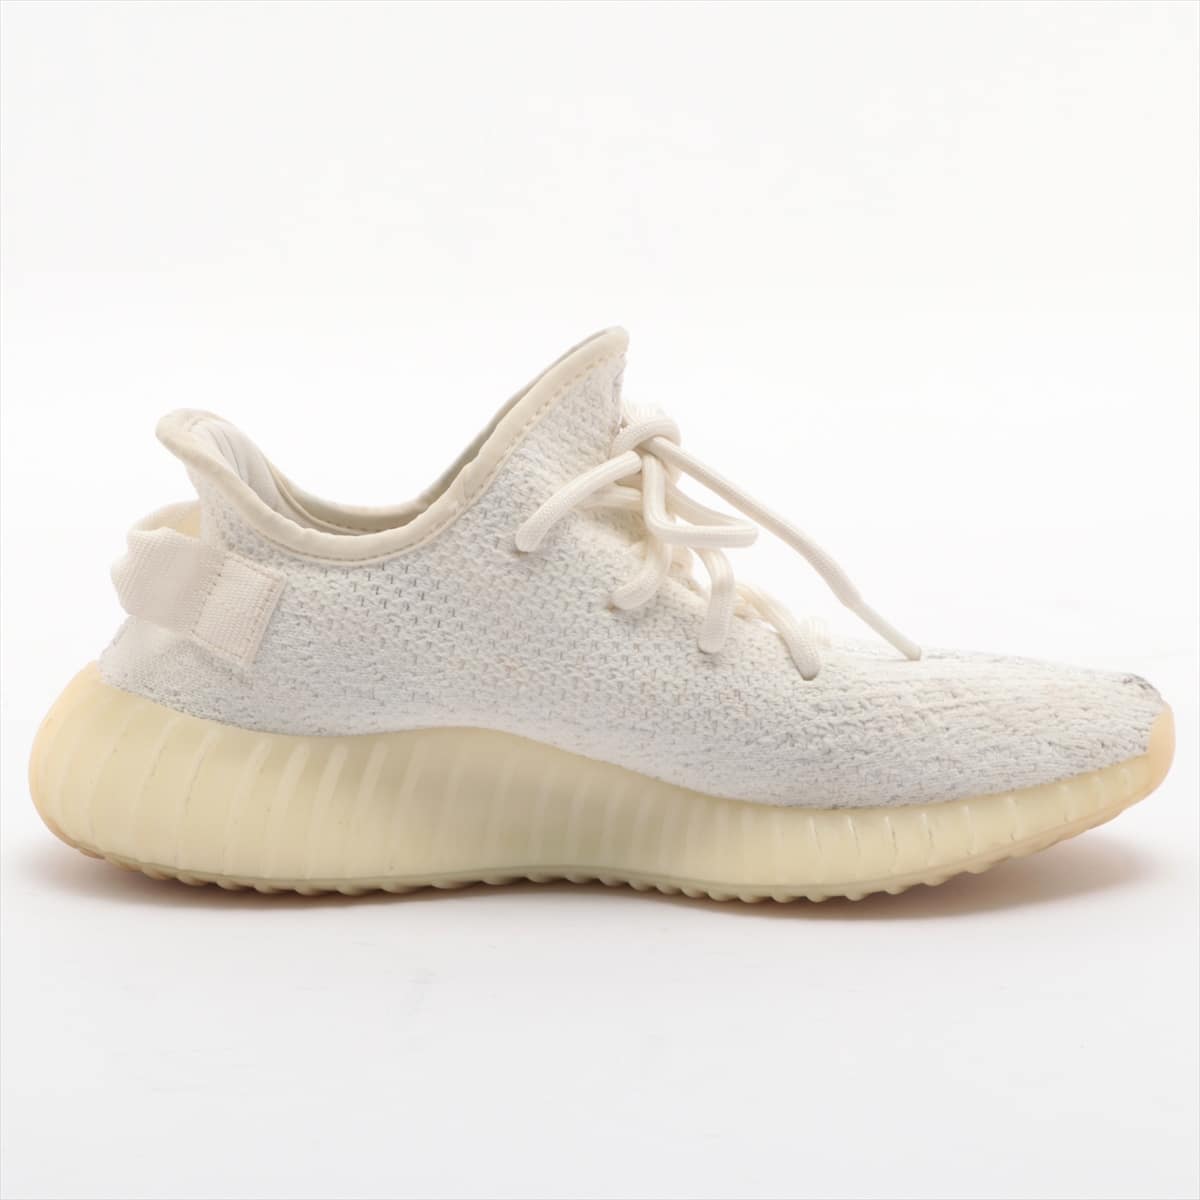 Adidas YEEZY BOOST 350 V2 Knit Sneakers 24cm Ladies' White CP9366